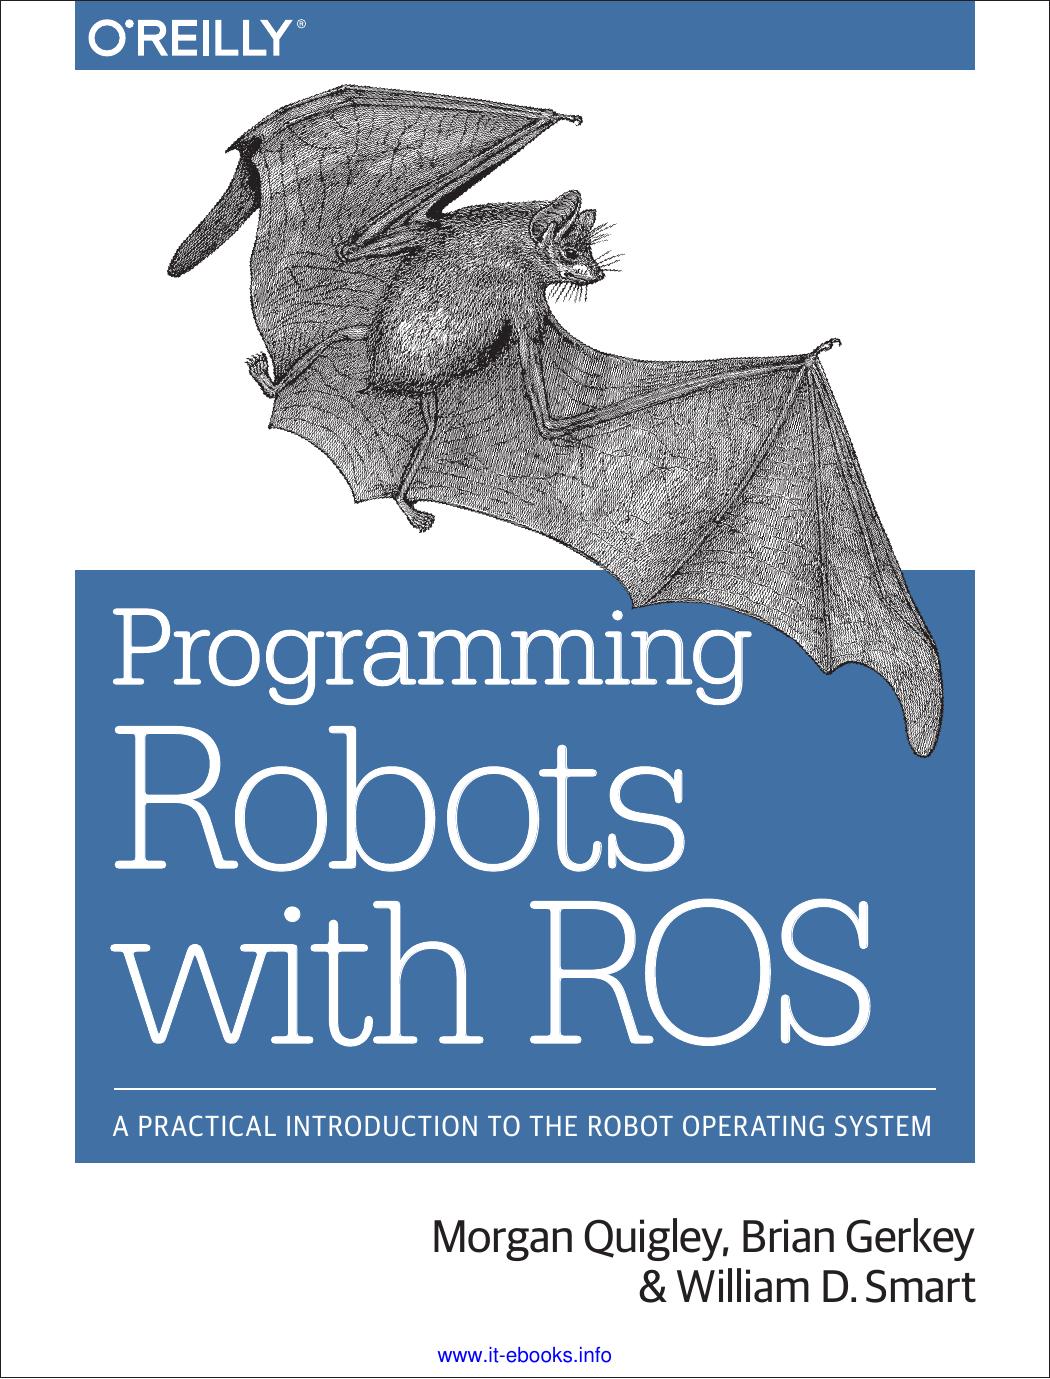 Programming Robots with Ros